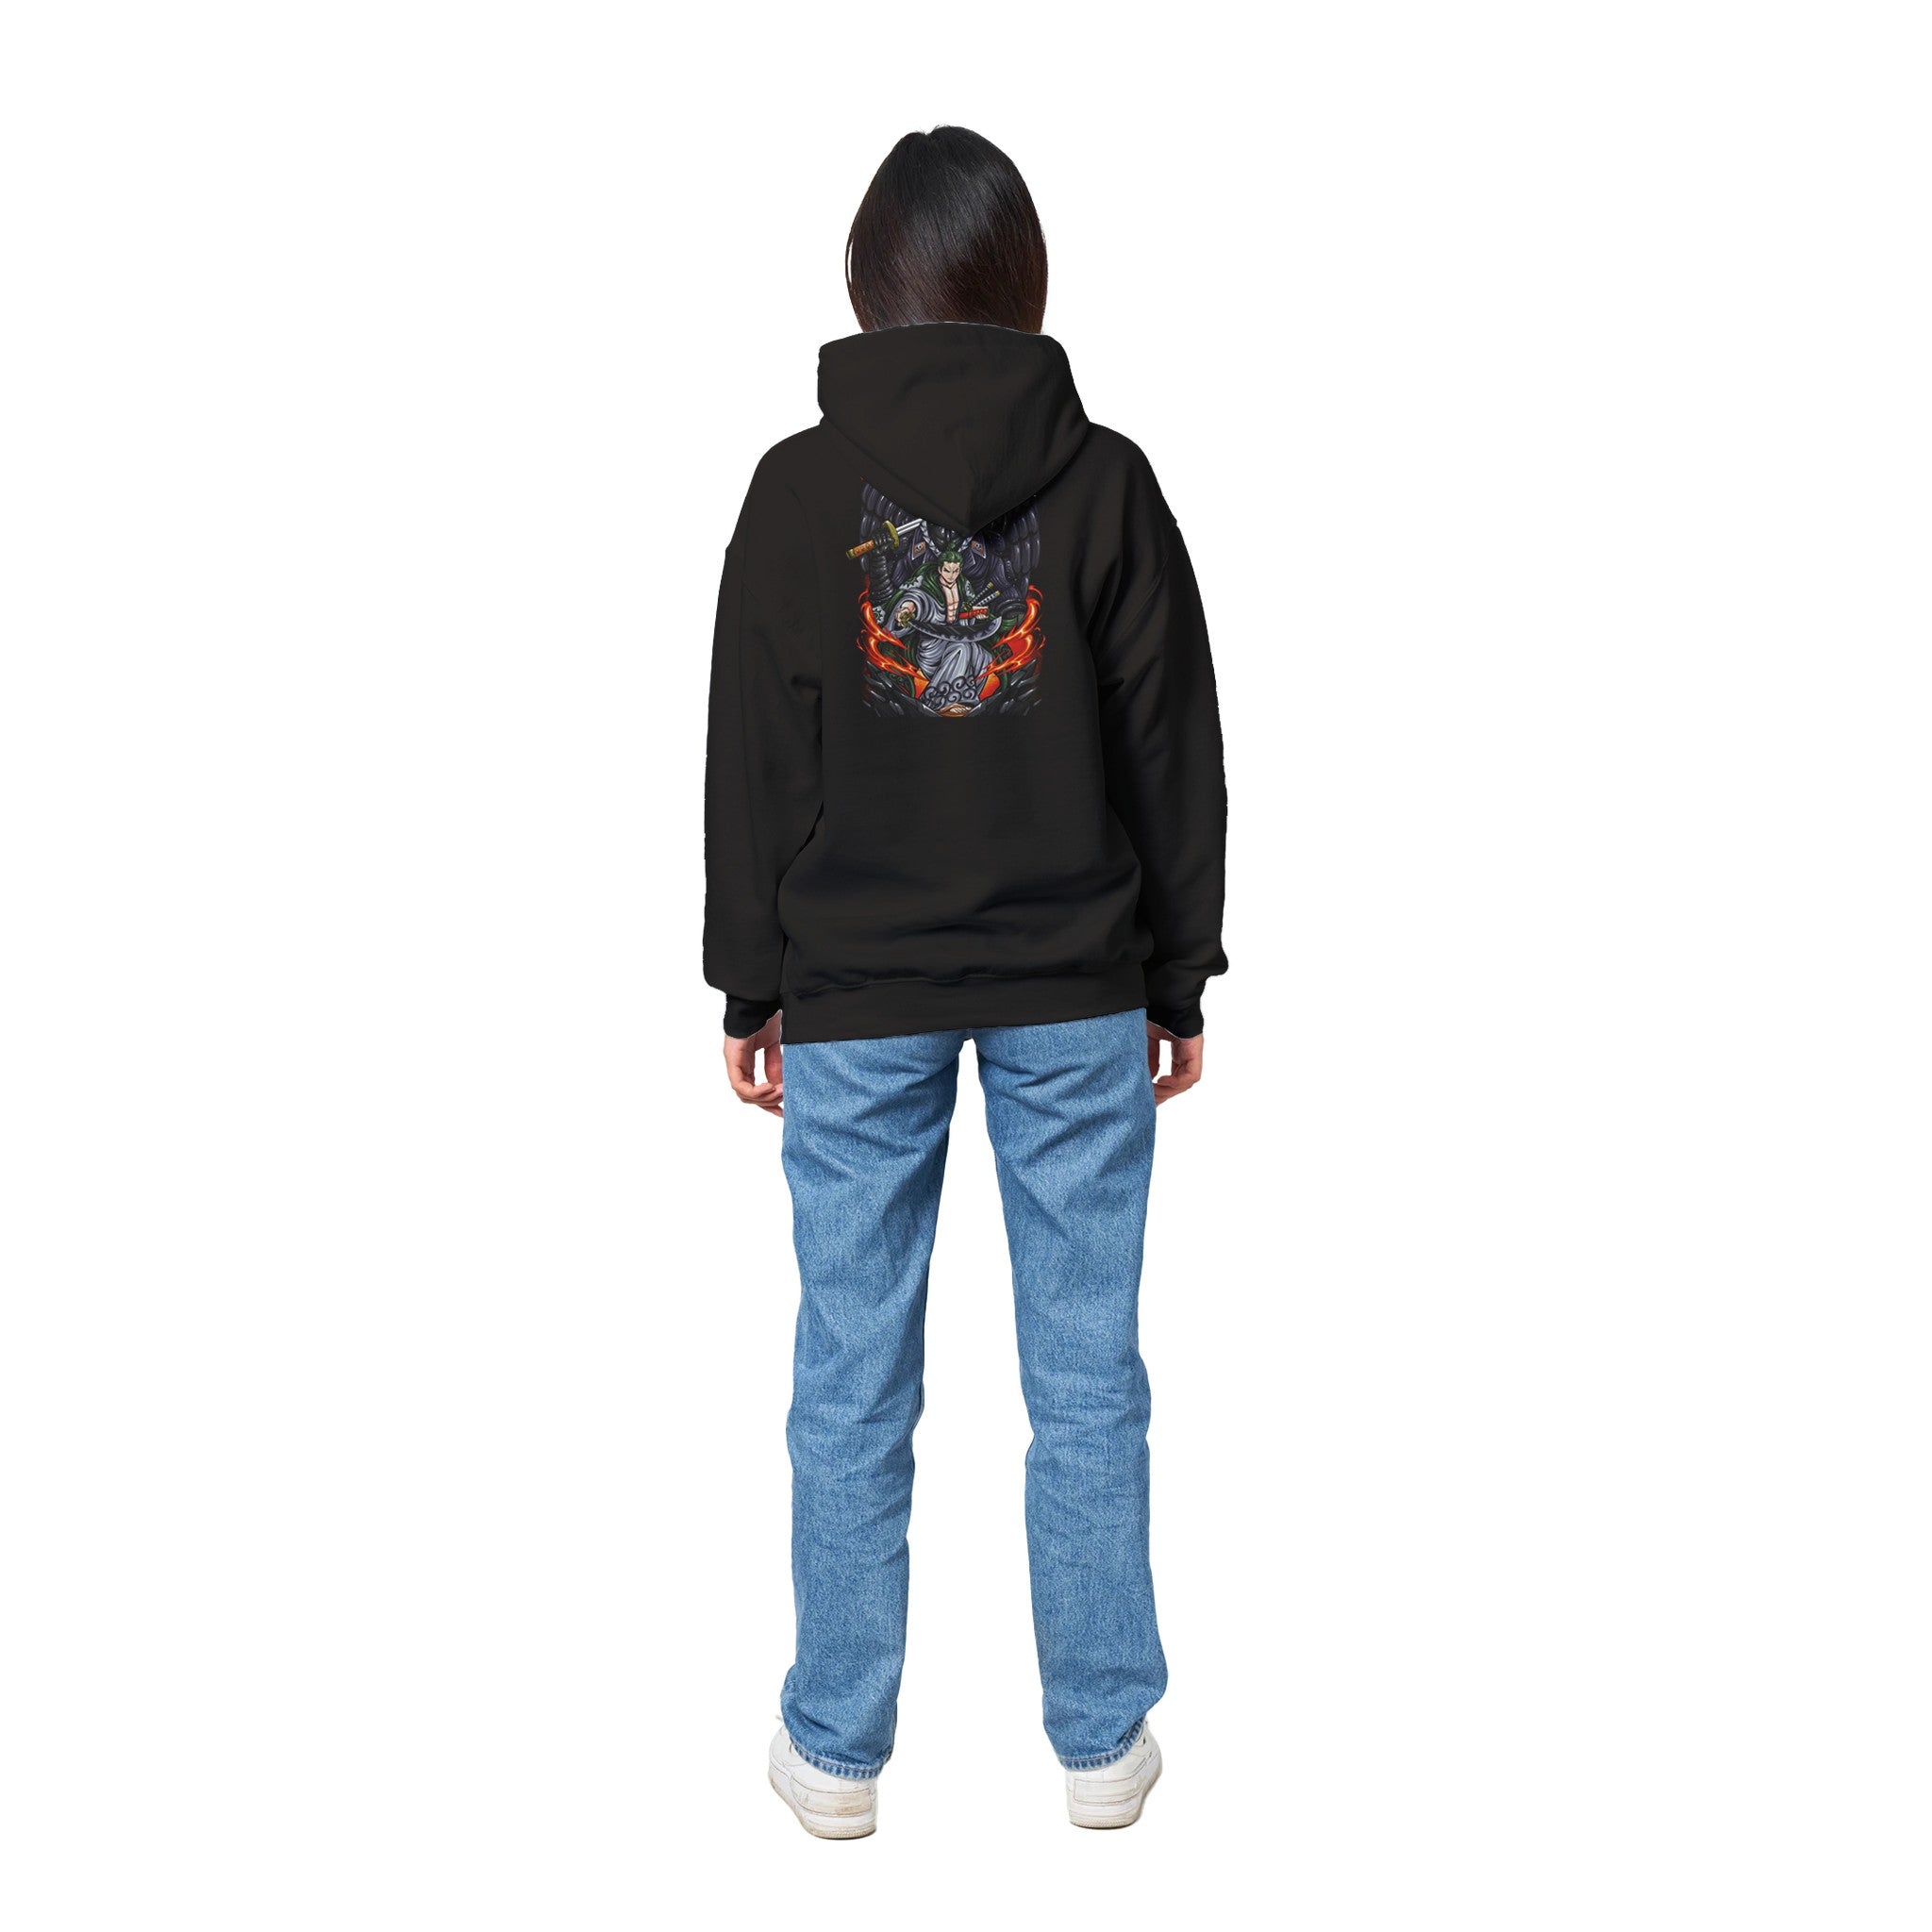 shop and buy one piece zoro anime clothing hoodie